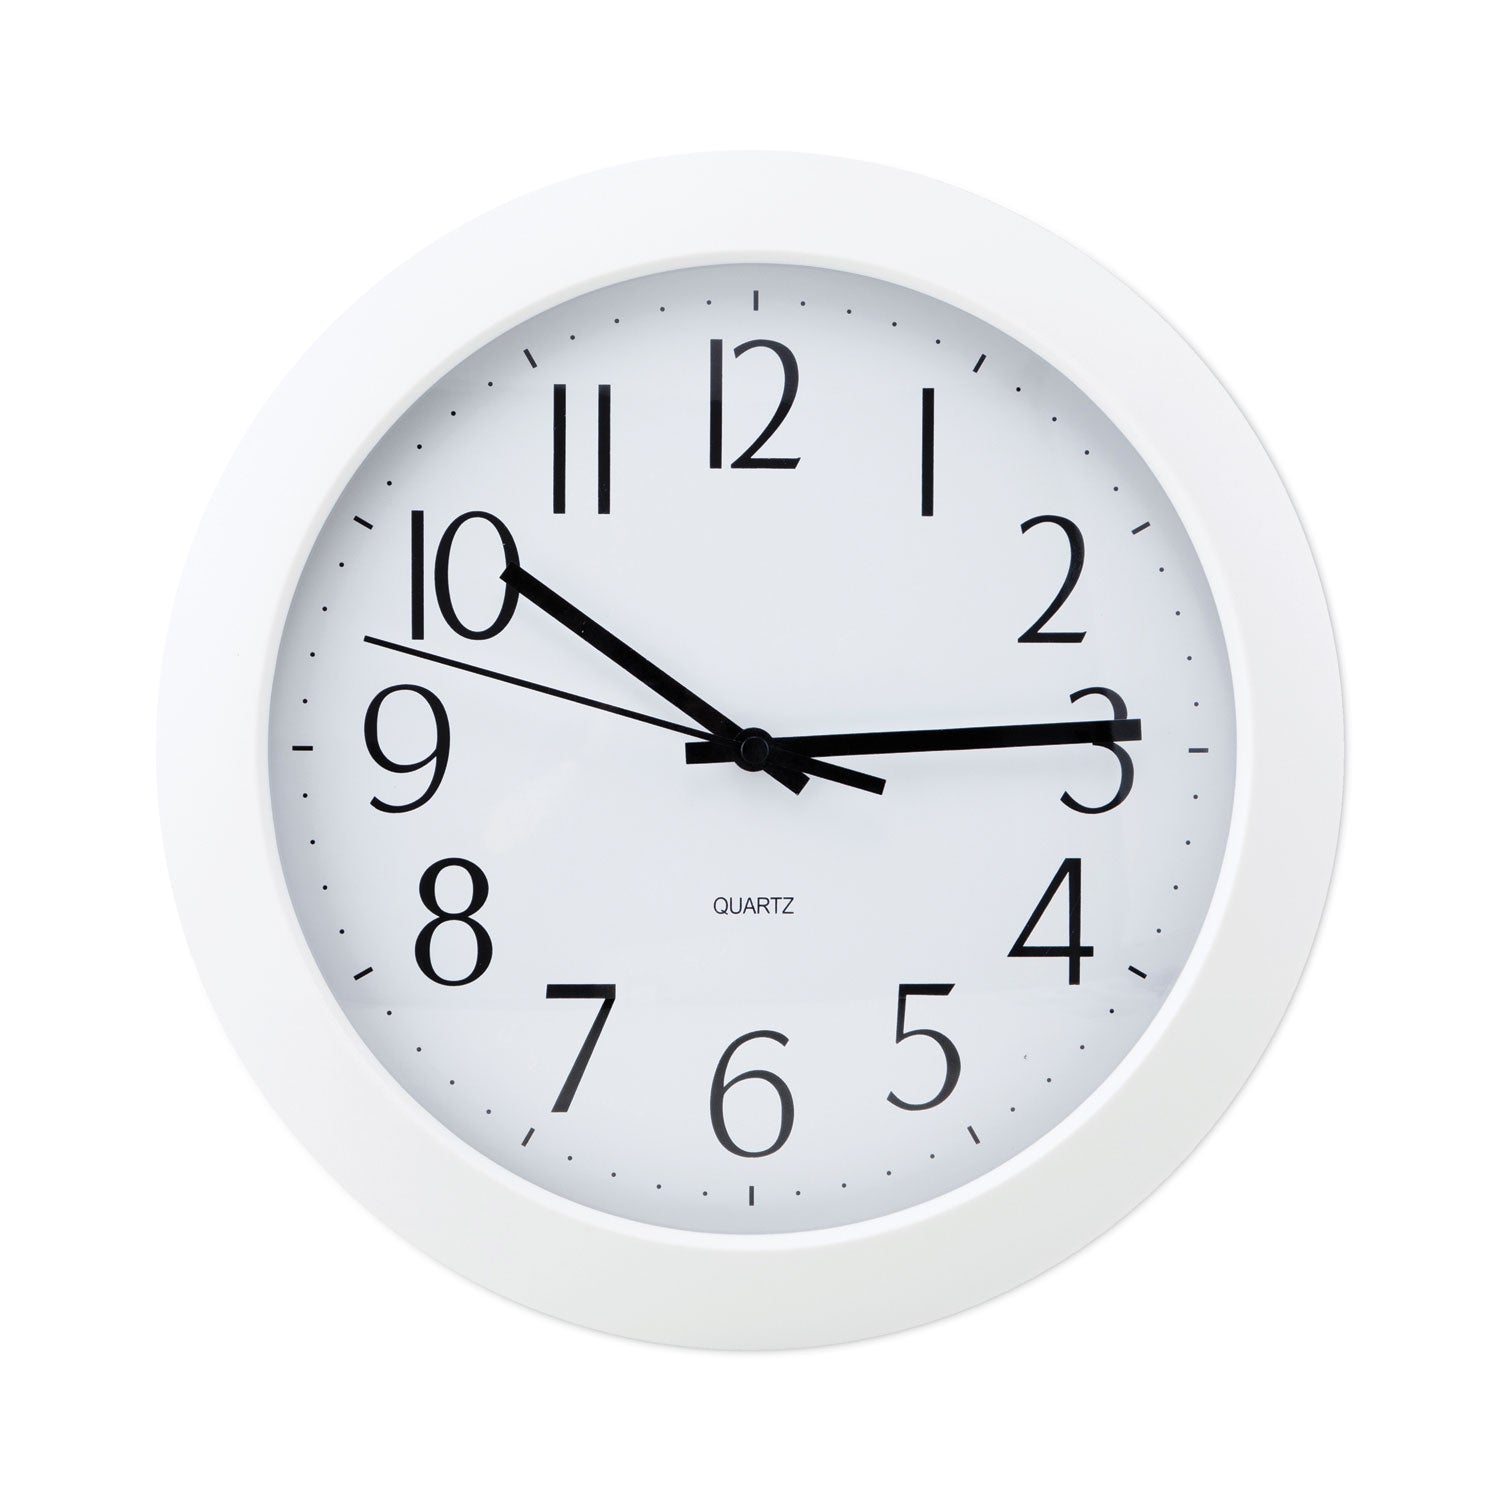 whisper-quiet-clock-12-overall-diameter-white-case-1-aa-sold-separately_unv10461 - 1